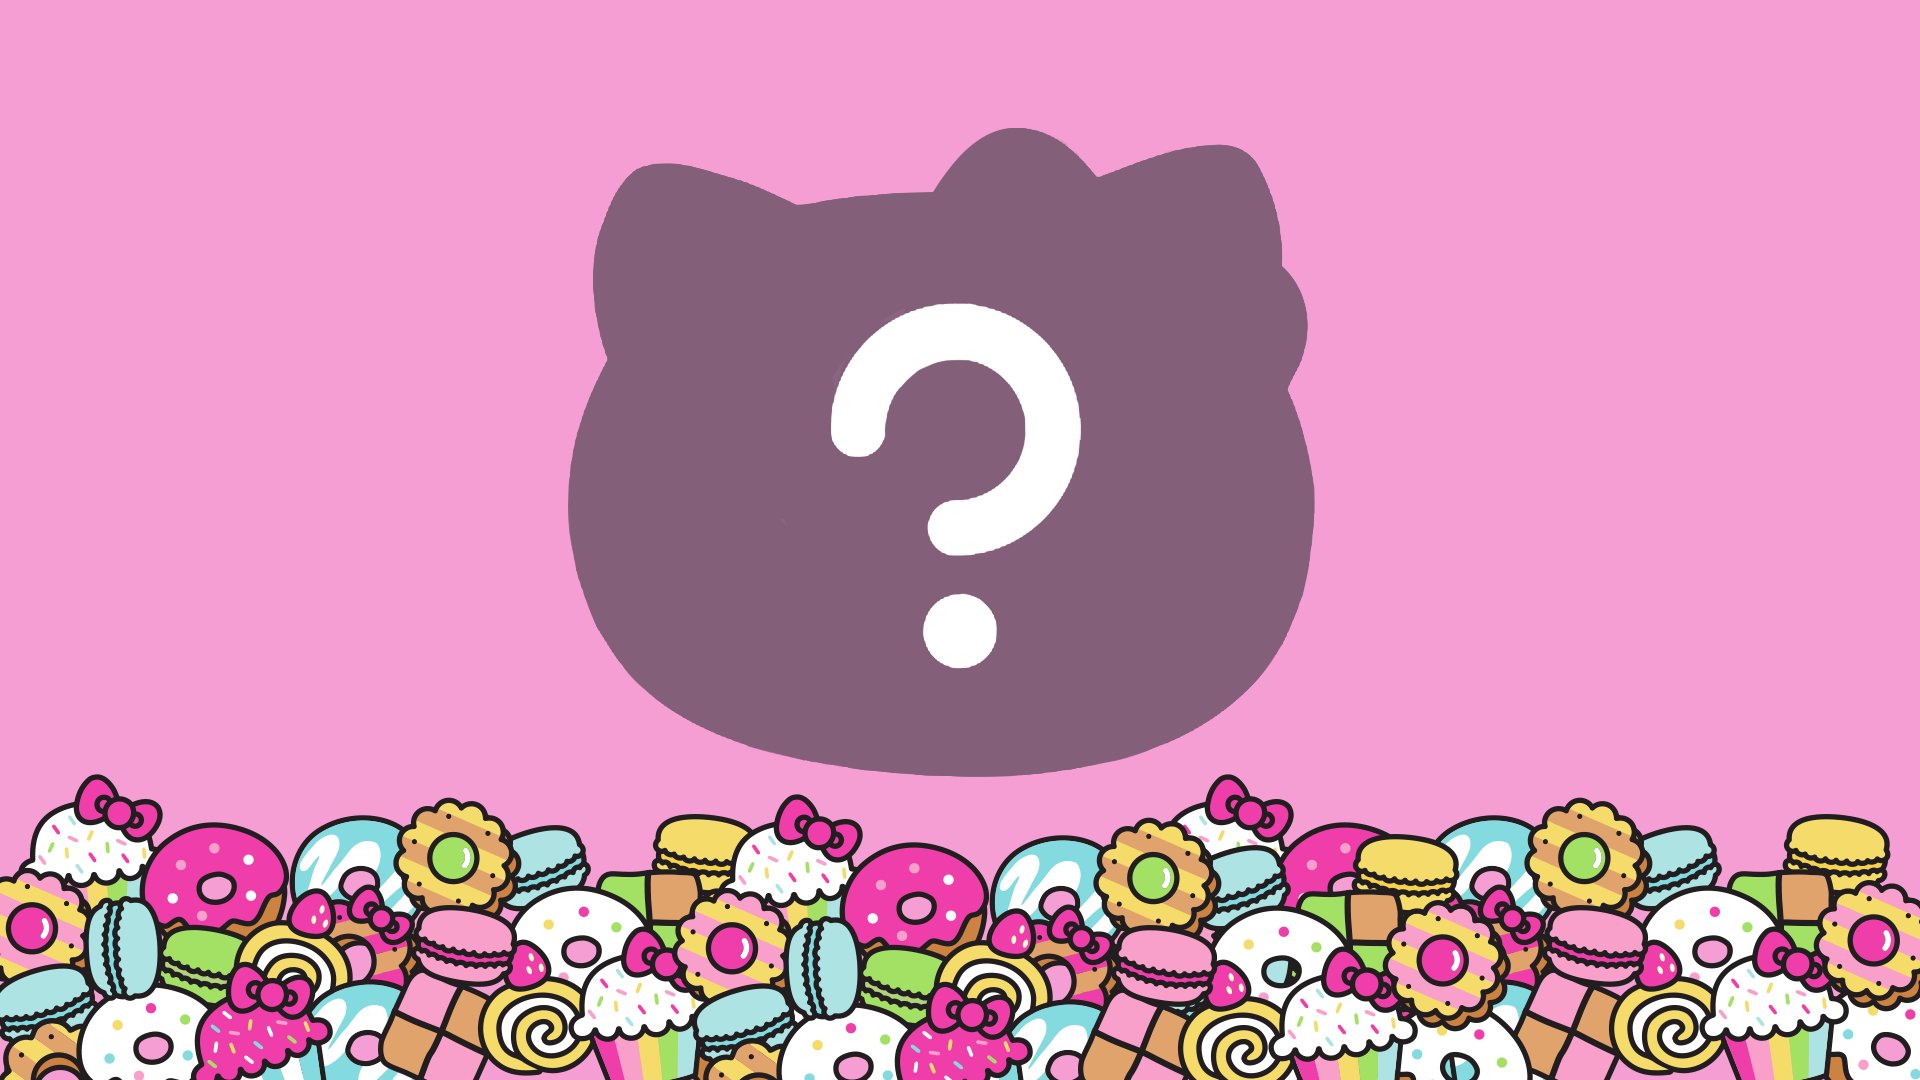 Roblox: My Hello Kitty Cafe codes (December 2023)